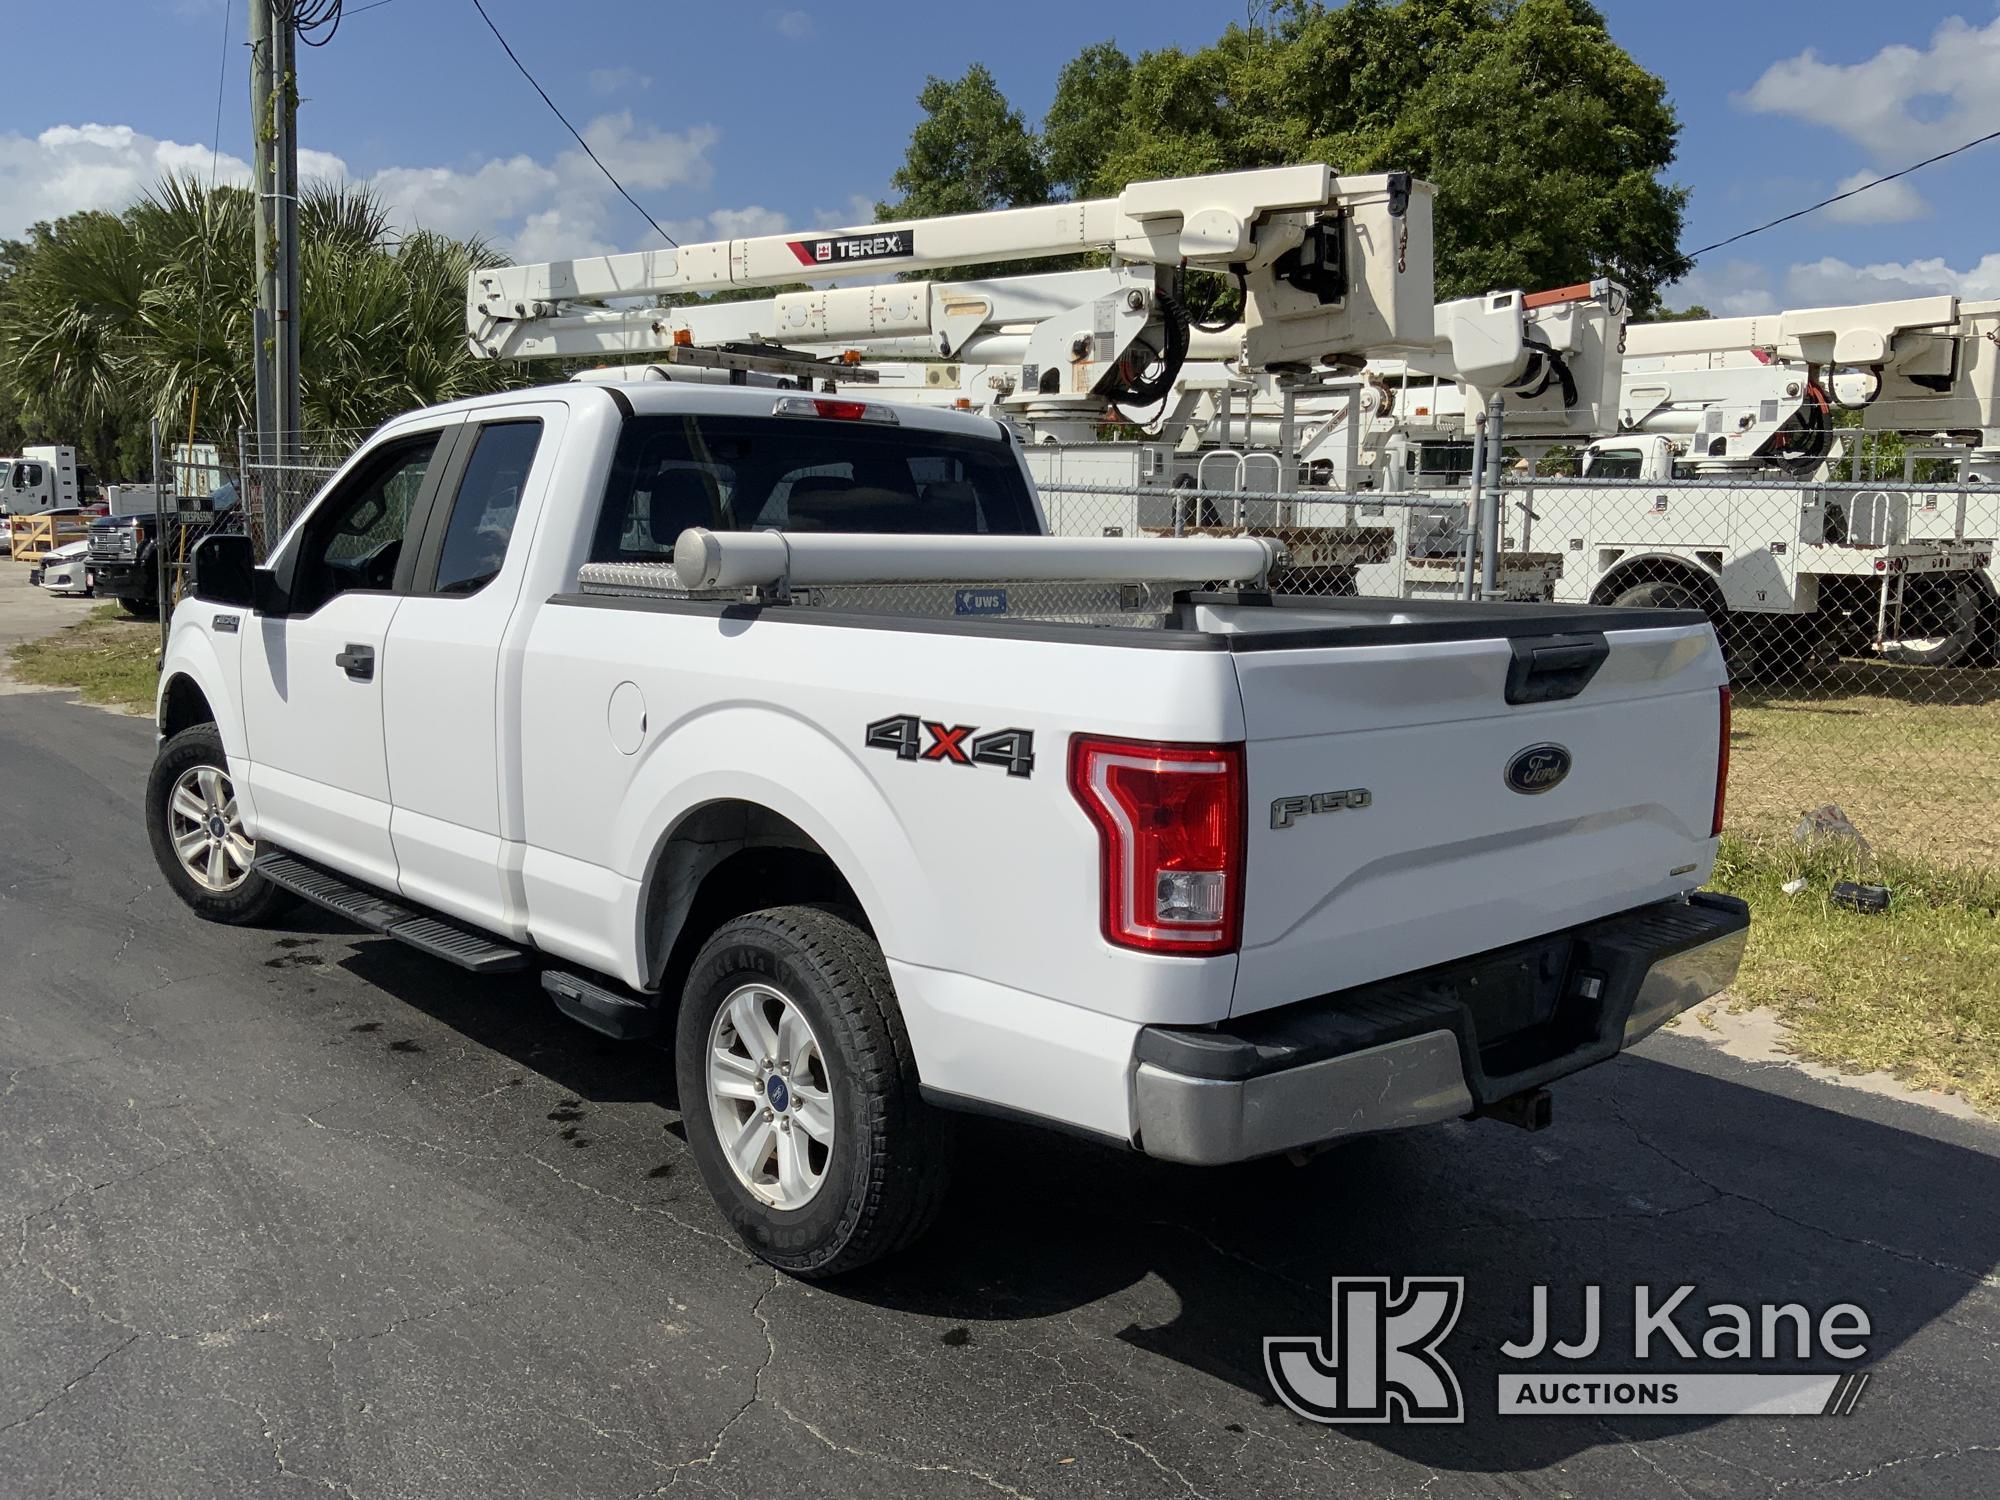 (Ocala, FL) 2015 Ford F150 4x4 Extended-Cab Pickup Truck Runs & Moves) (Body/Paint Damage